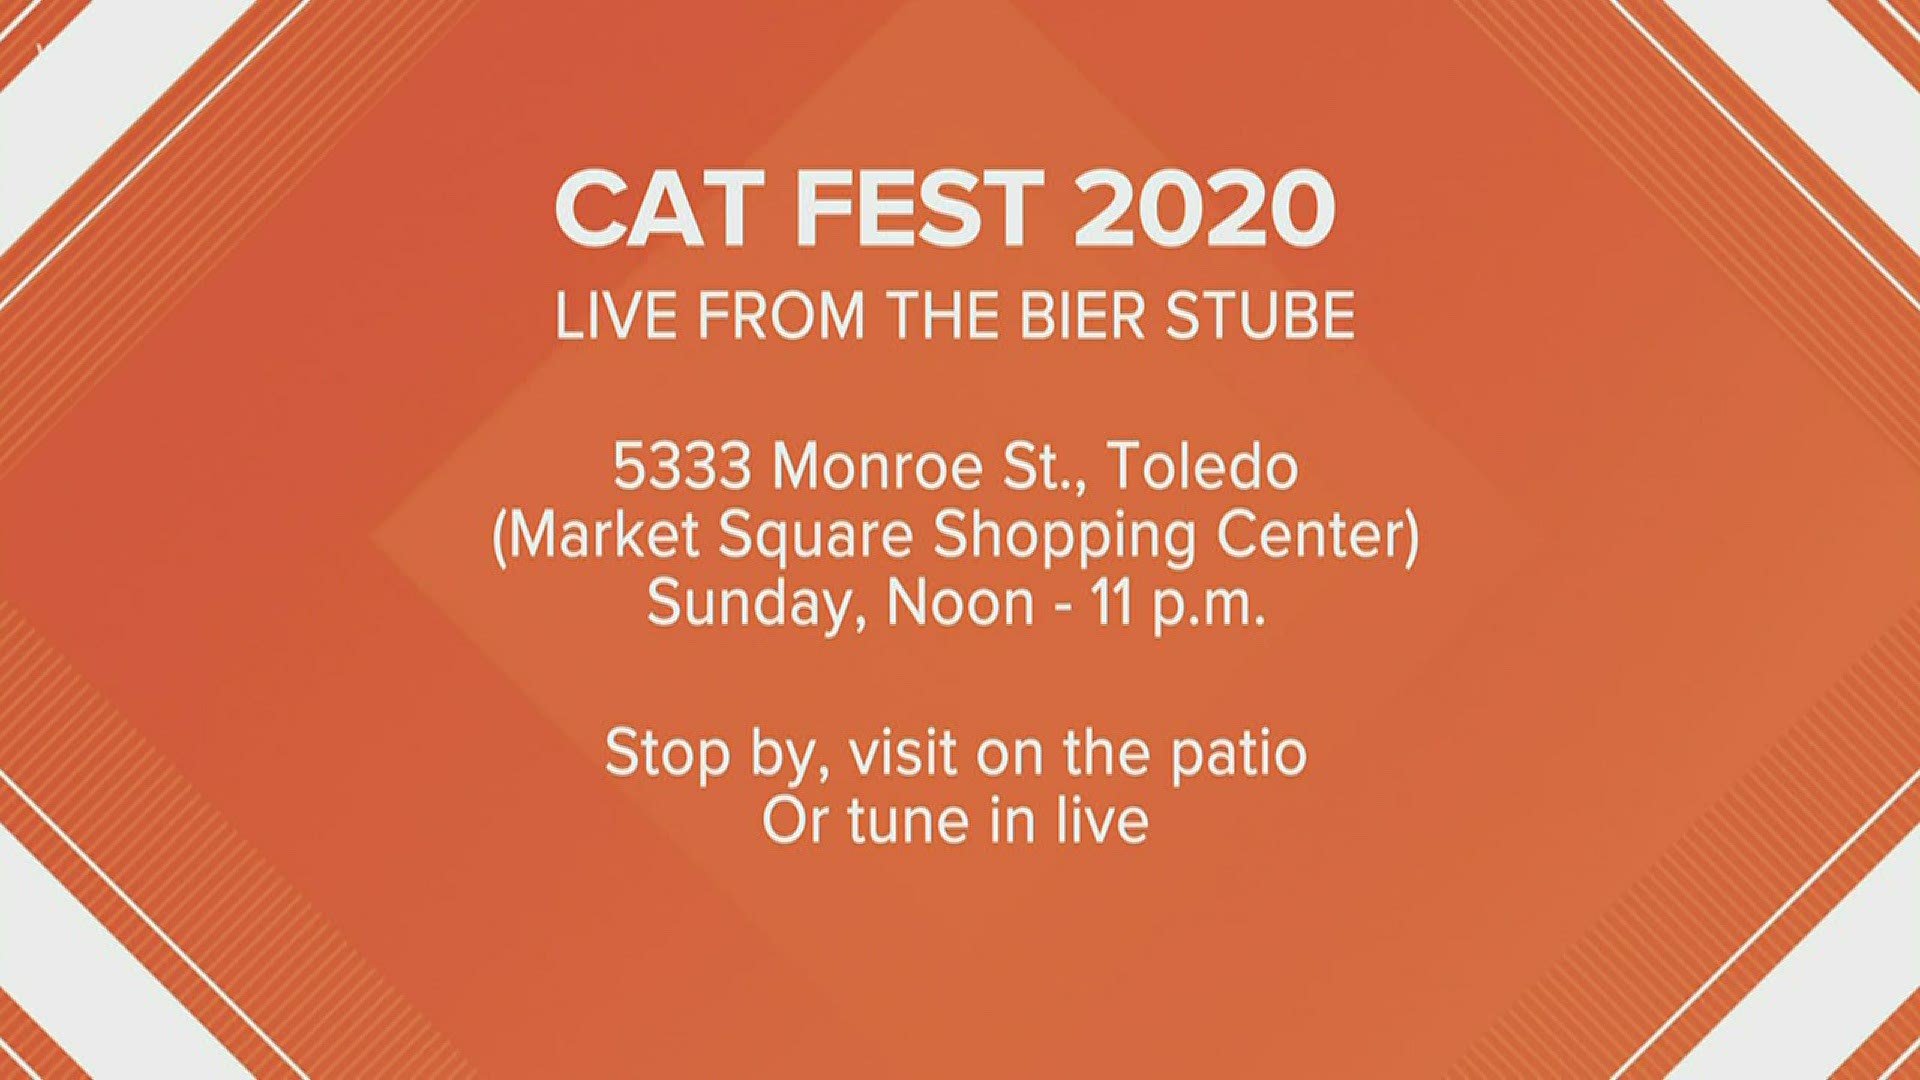 Cat Fest, the annual celebration of the life of domestic violence victim Cat Lambert, is still happening this year - things will just be a little different!